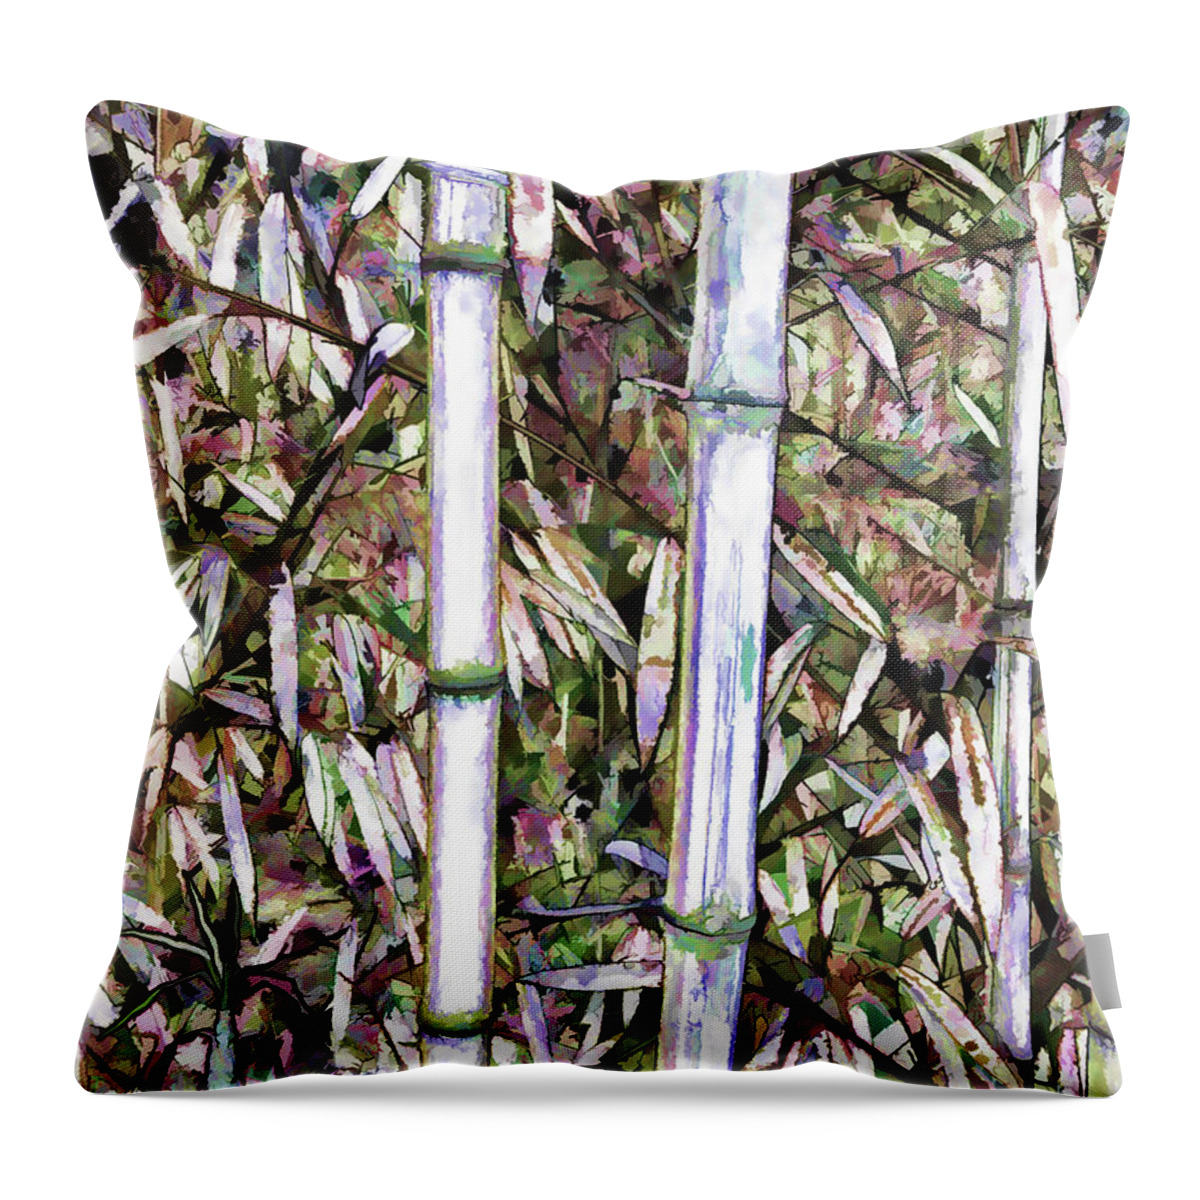 Bamboo Stalks Throw Pillow featuring the painting Bamboo Stalks by Jeelan Clark